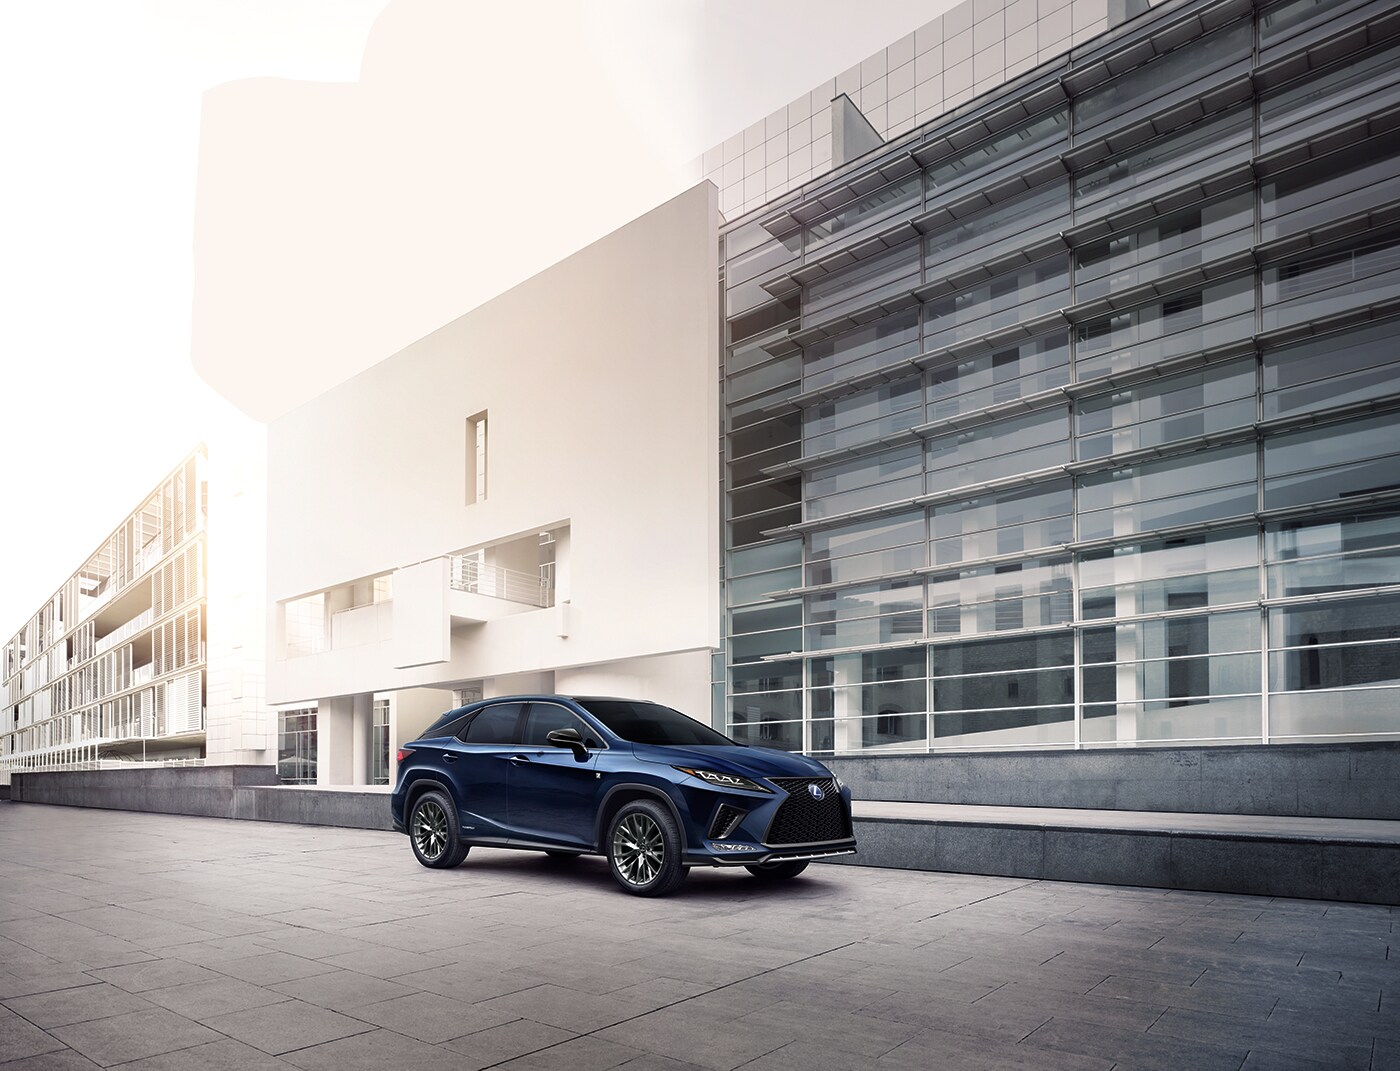 Style and Performance Features of the 2020 Lexus RX at Bobby Rahal Lexus of Lewistown of Lewistown | Dark Blue 2020 Lexus RX parked on side of building